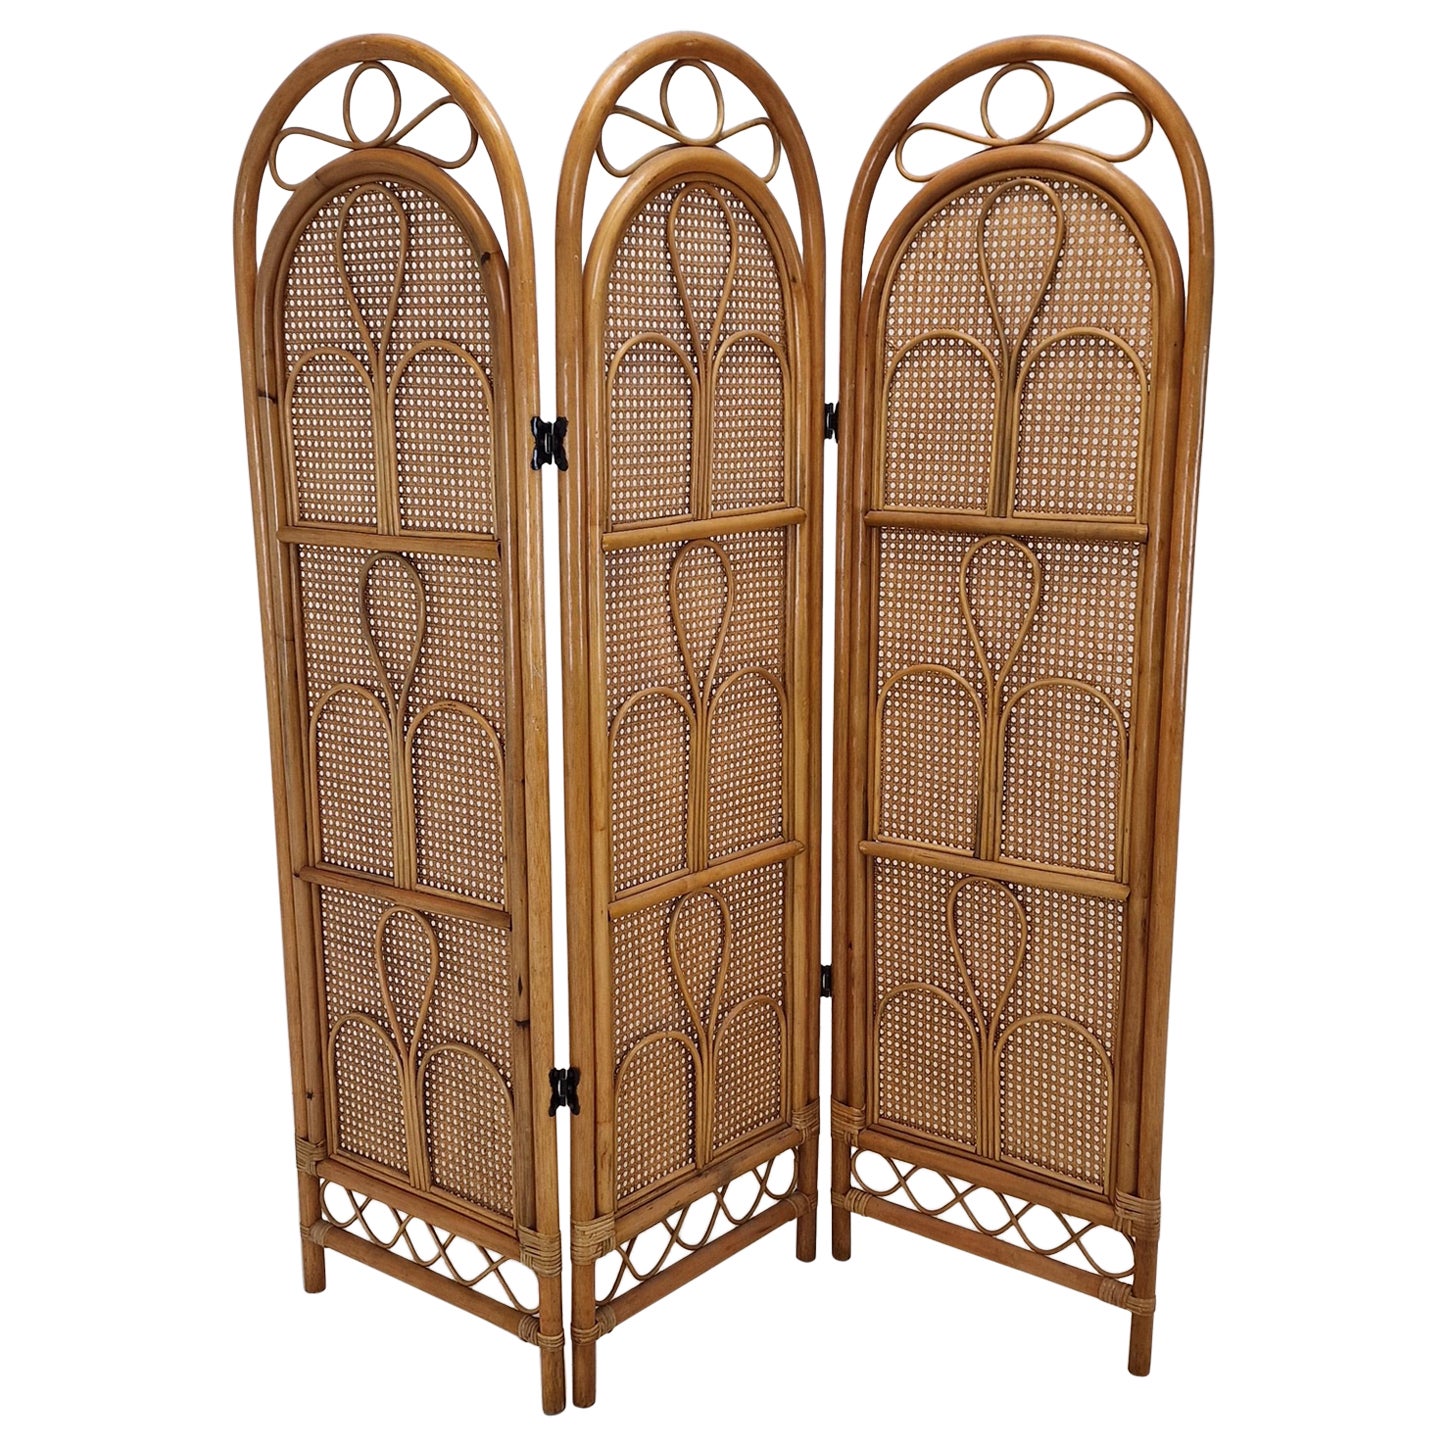 Italian Room Divider in Rattan and Wicker, 1960s For Sale